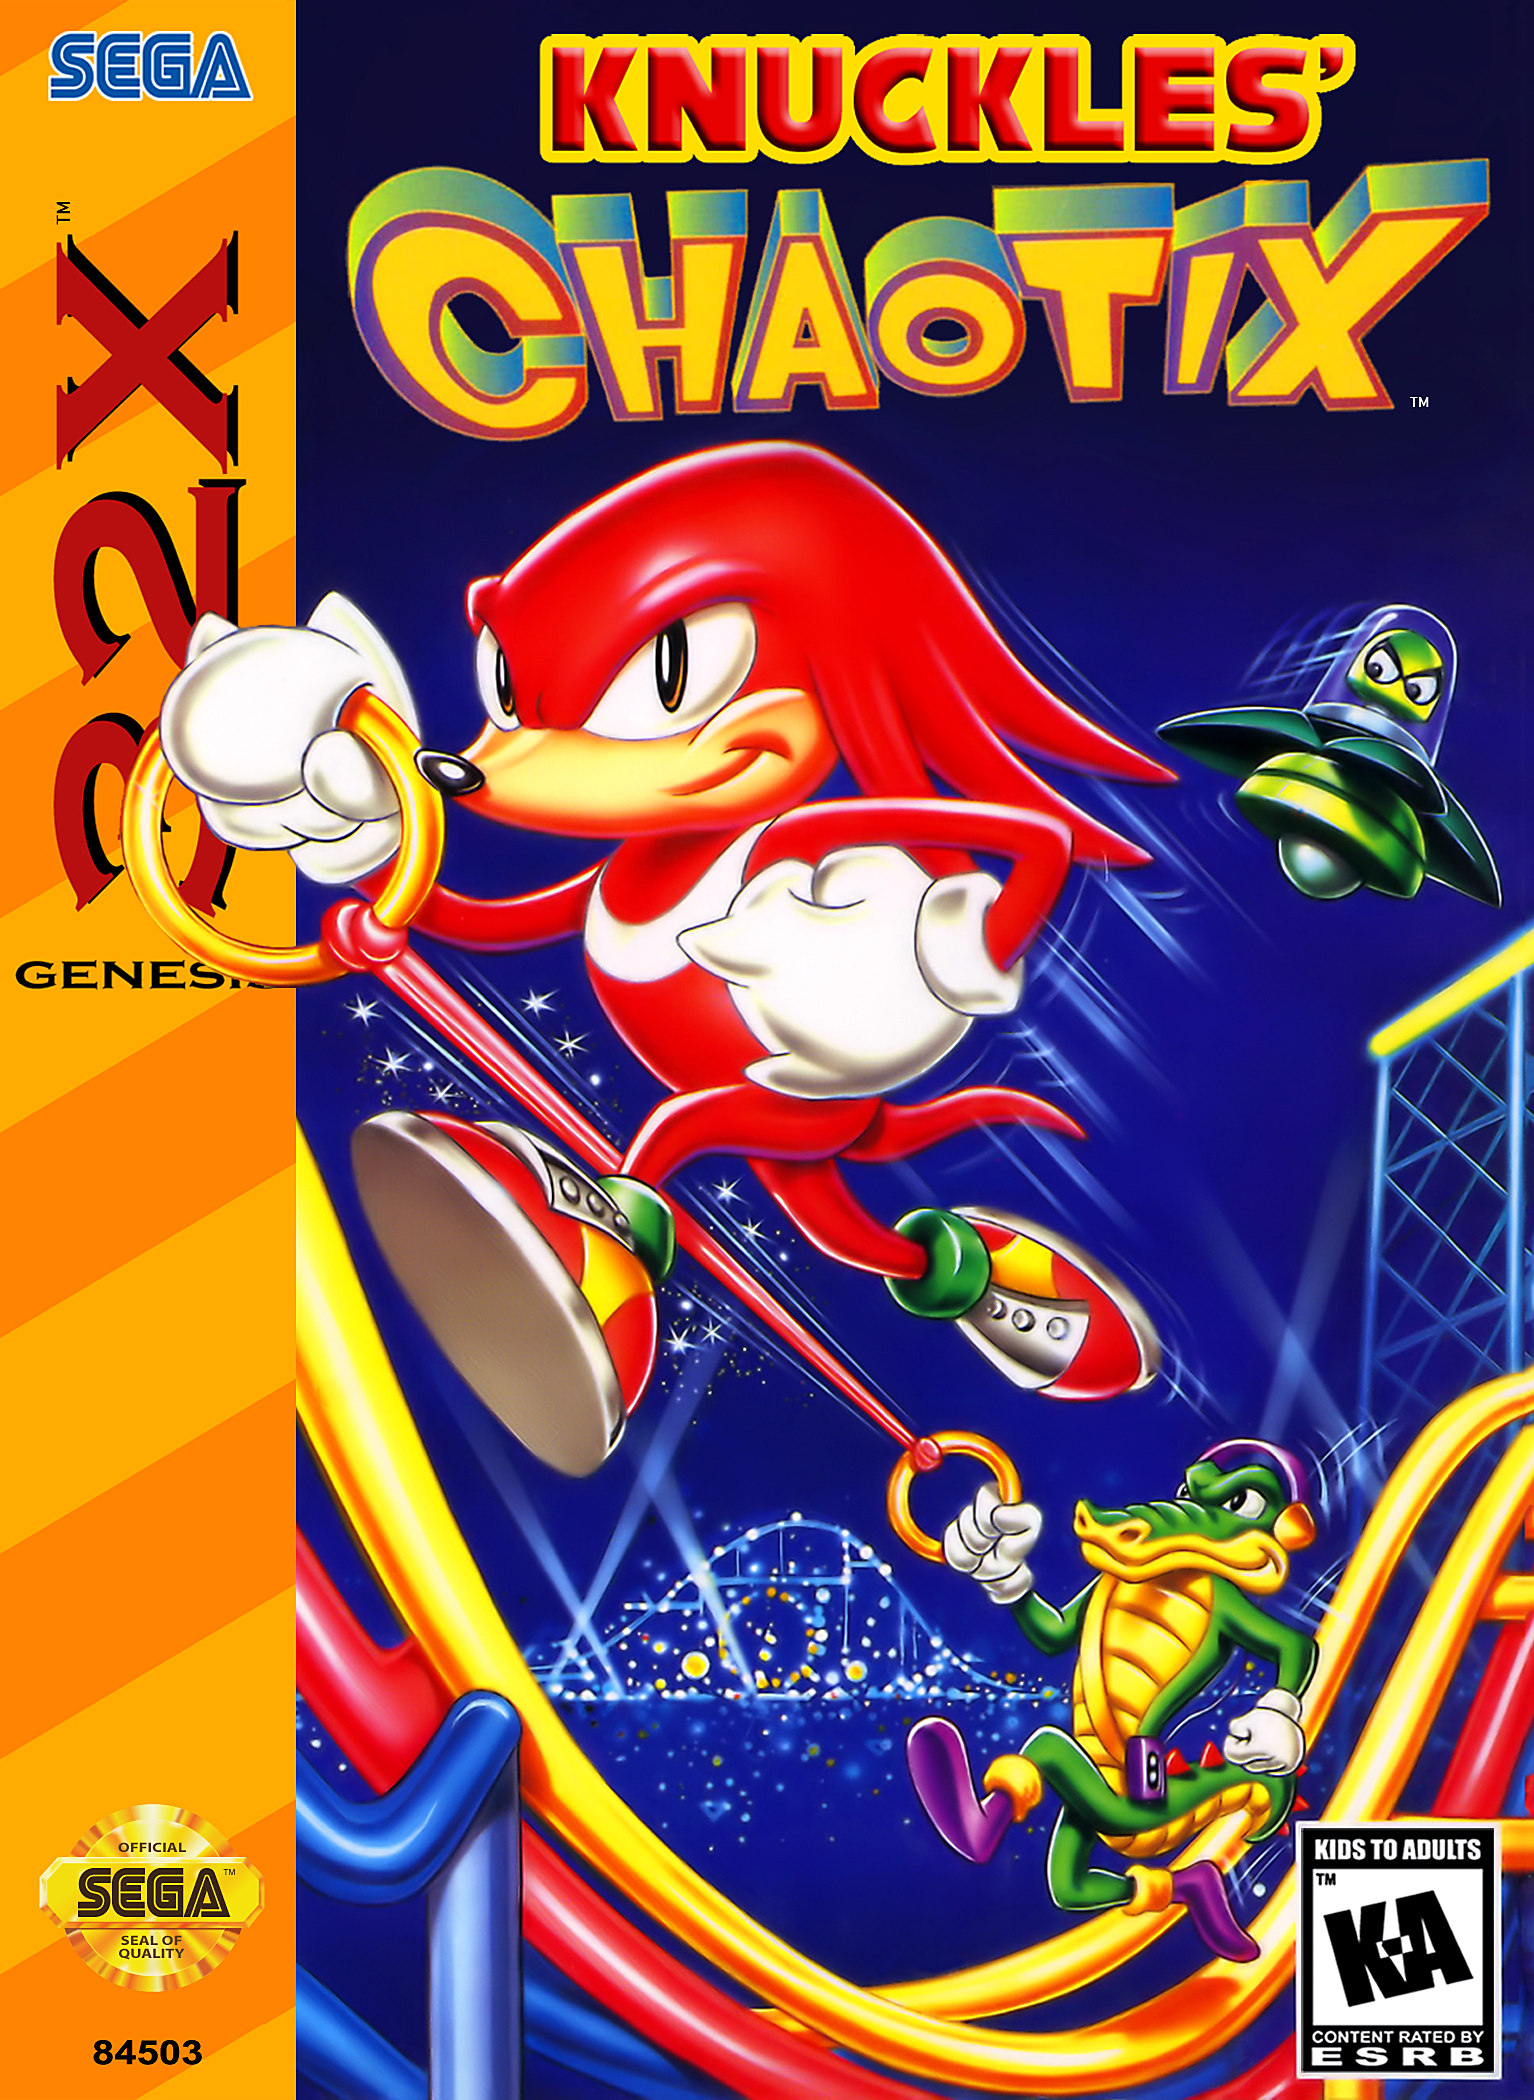 Image of Knuckles' Chaotix